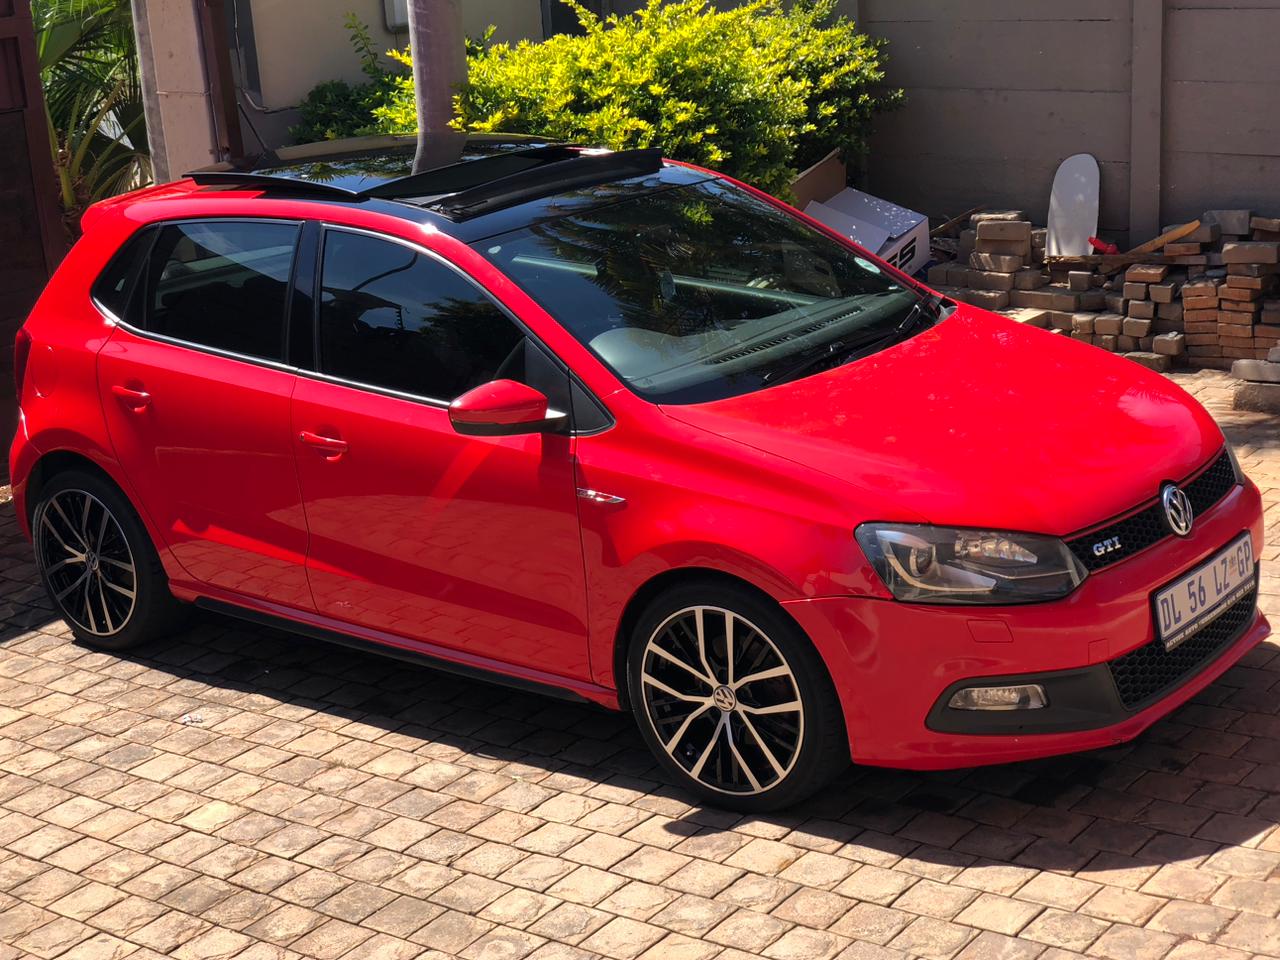 Polo 6 Gti 1.4 2013 for Sale